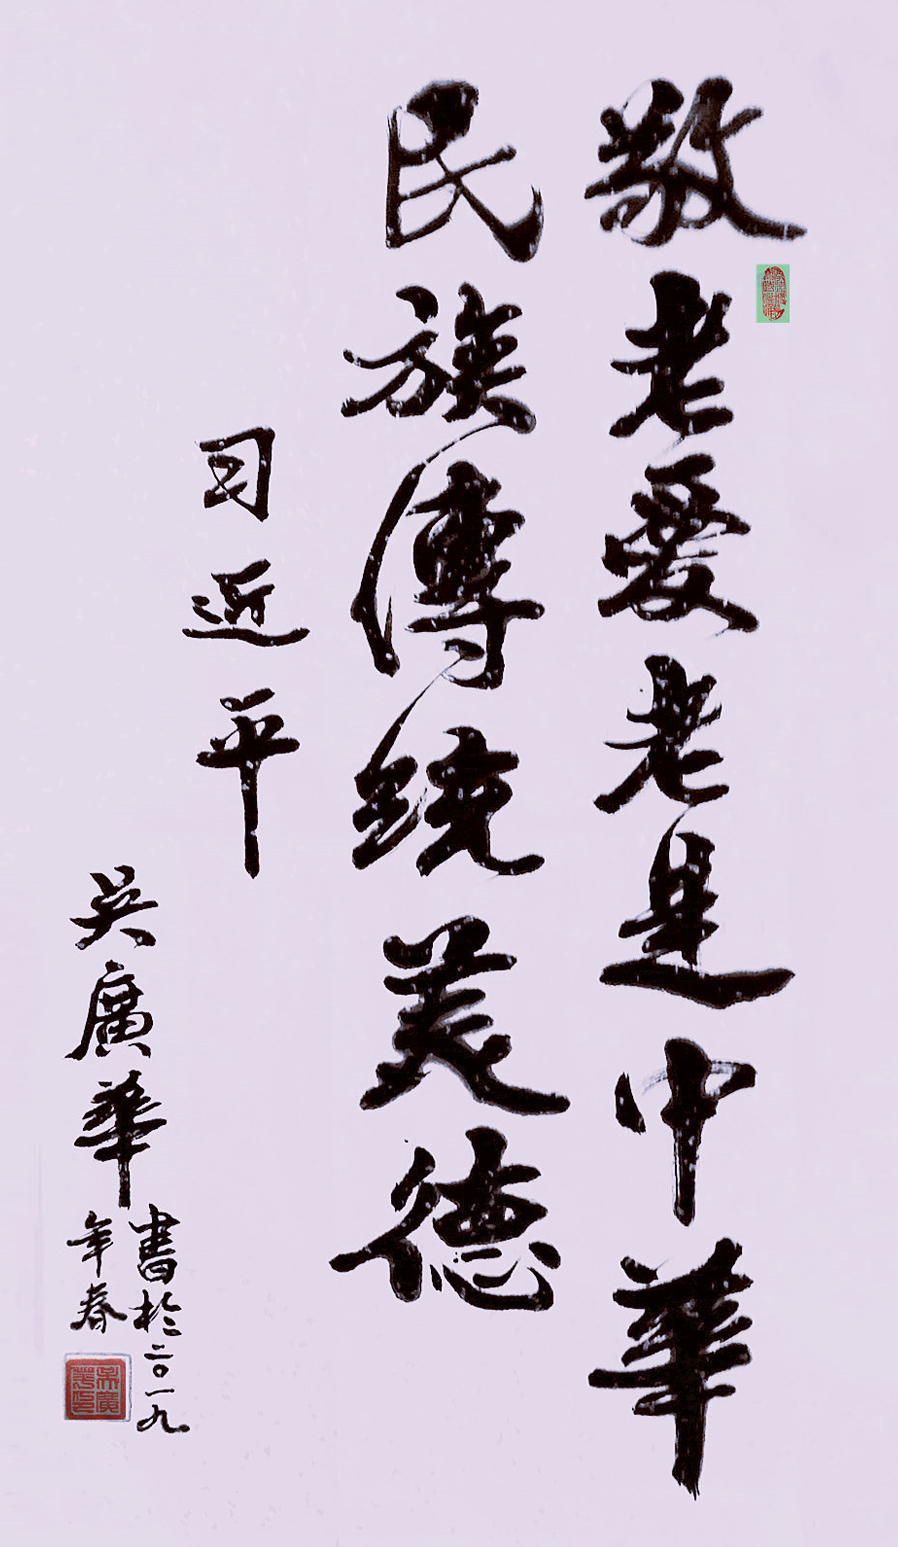 http://img.toumeiw.cn/upload/images/20220118/3a340fe6b479a240acb45226954b0032.png